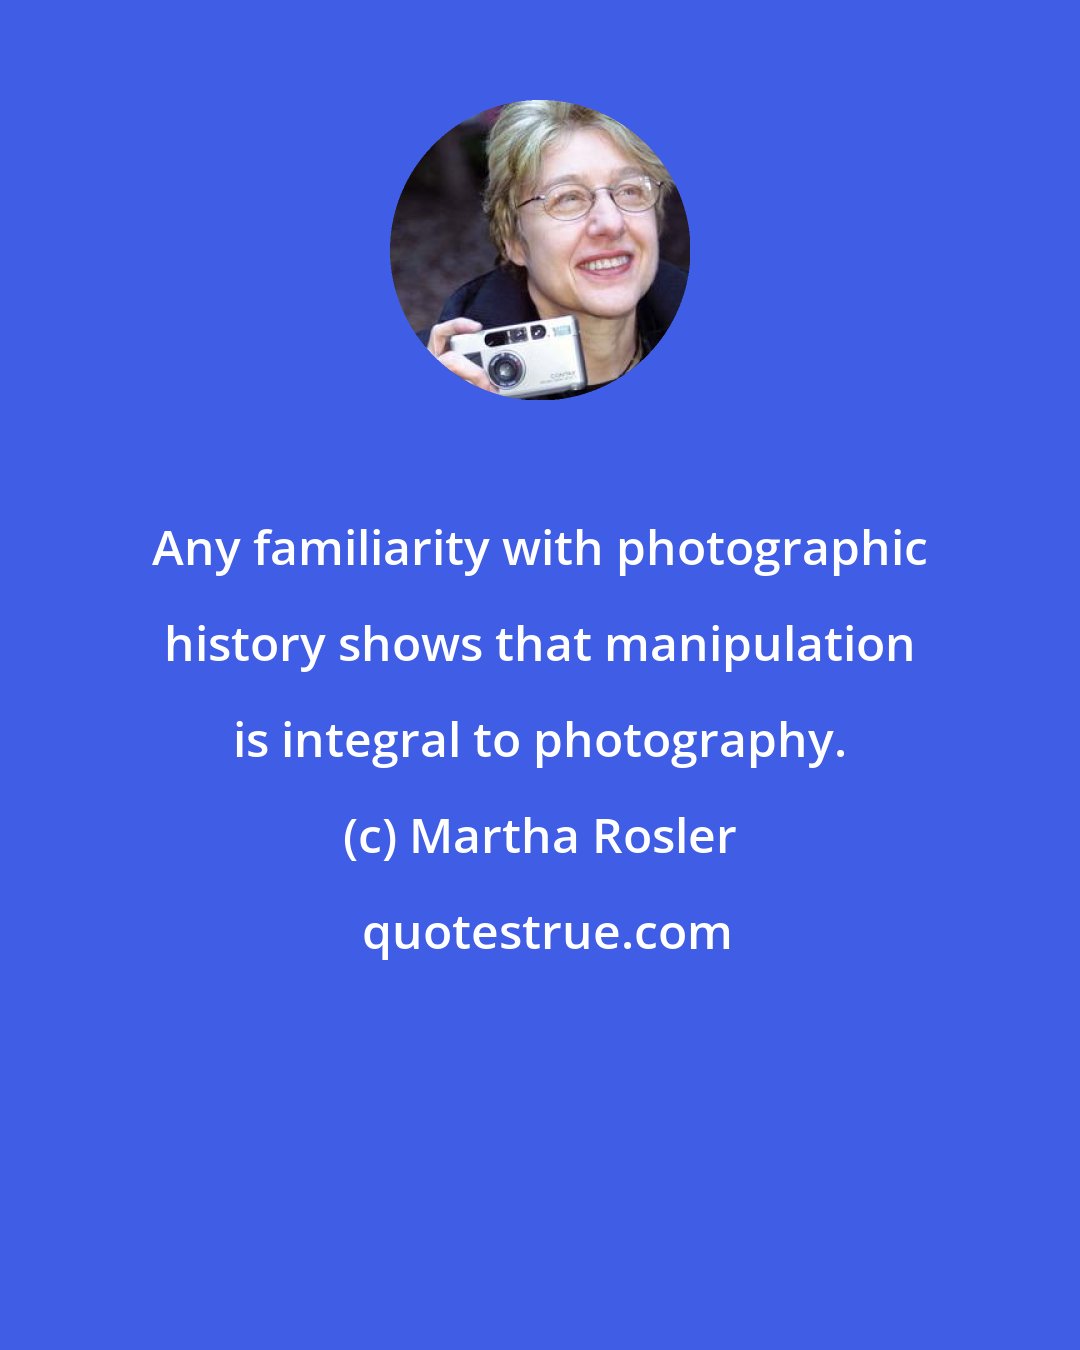 Martha Rosler: Any familiarity with photographic history shows that manipulation is integral to photography.